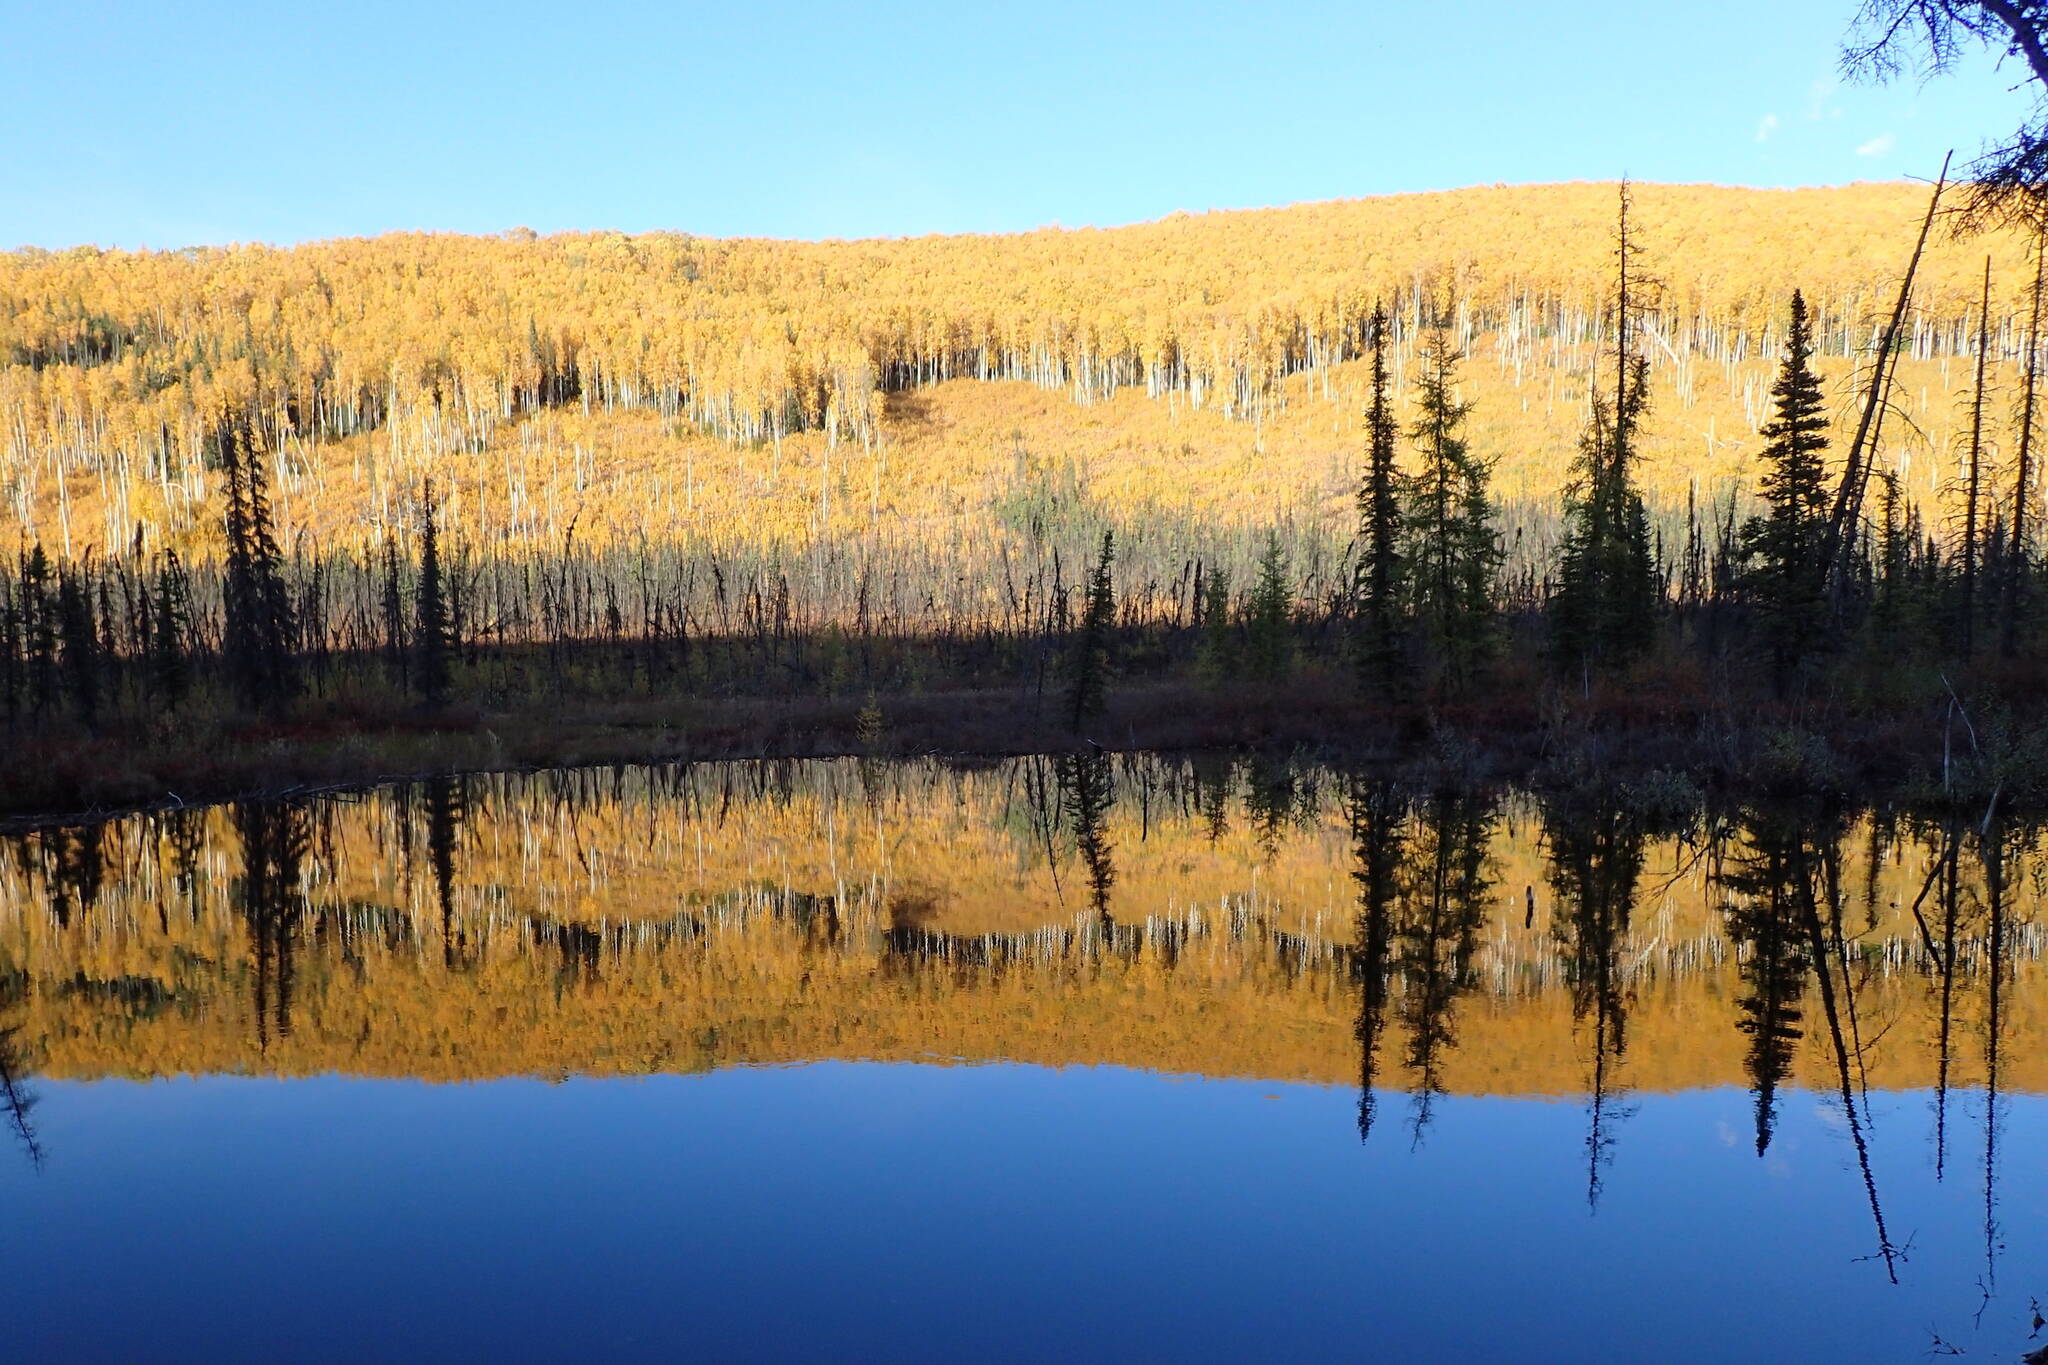 Birch and aspen glow orange in September in the Chena River State Recreation Area east of Fairbanks. (Photo by Ned Rozell)